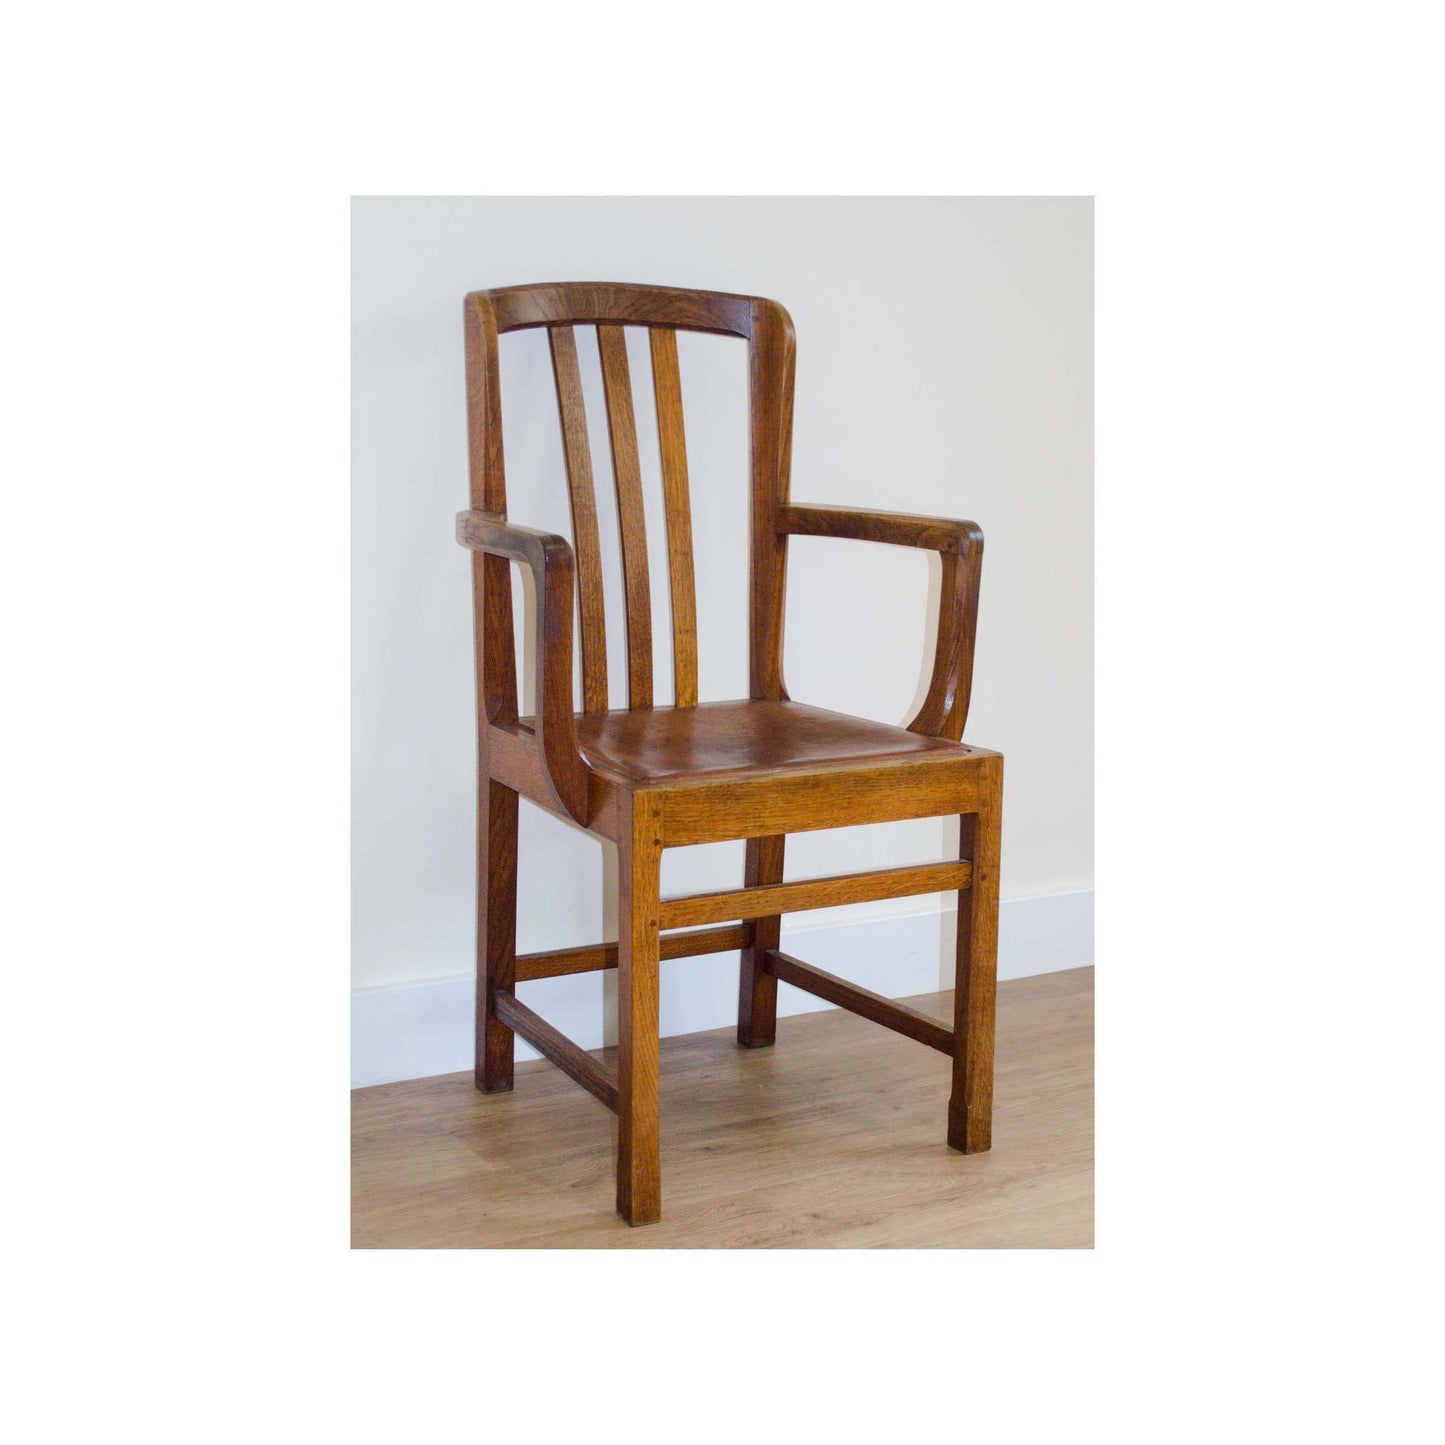 Stanley Webb Davies Stanley Webb Davies Arts and Craft Oak Armchair with Leather Seat 1936 1936